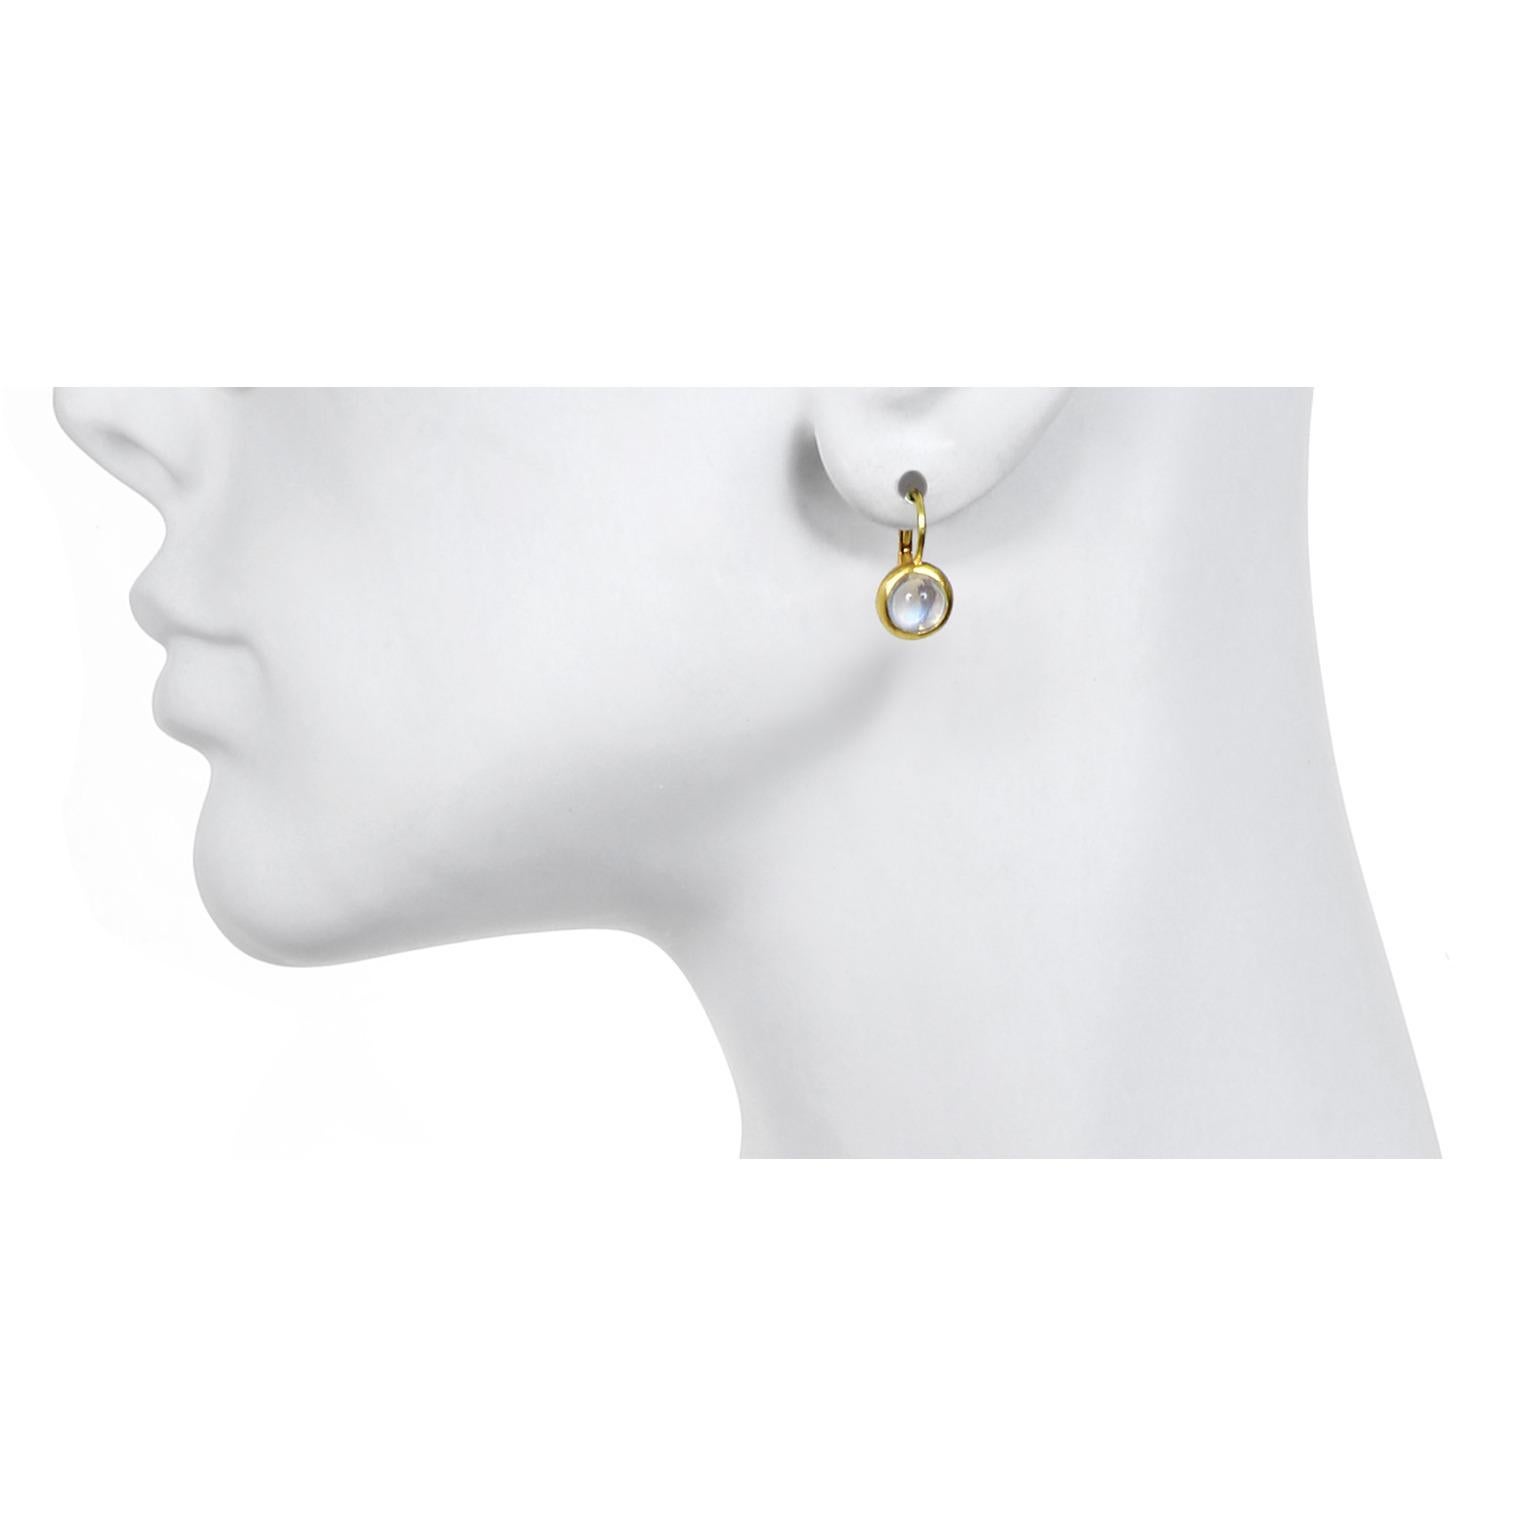 Faye Kim 18K Gold Moonstone Leverback Earrings

The perfect go-to earrings.  Incredible Ceylon moonstone with blue flash set beautifully in a bezel setting.  These understated elegant earrings go effortlessly from day to evening.
Moonstones:  2.60